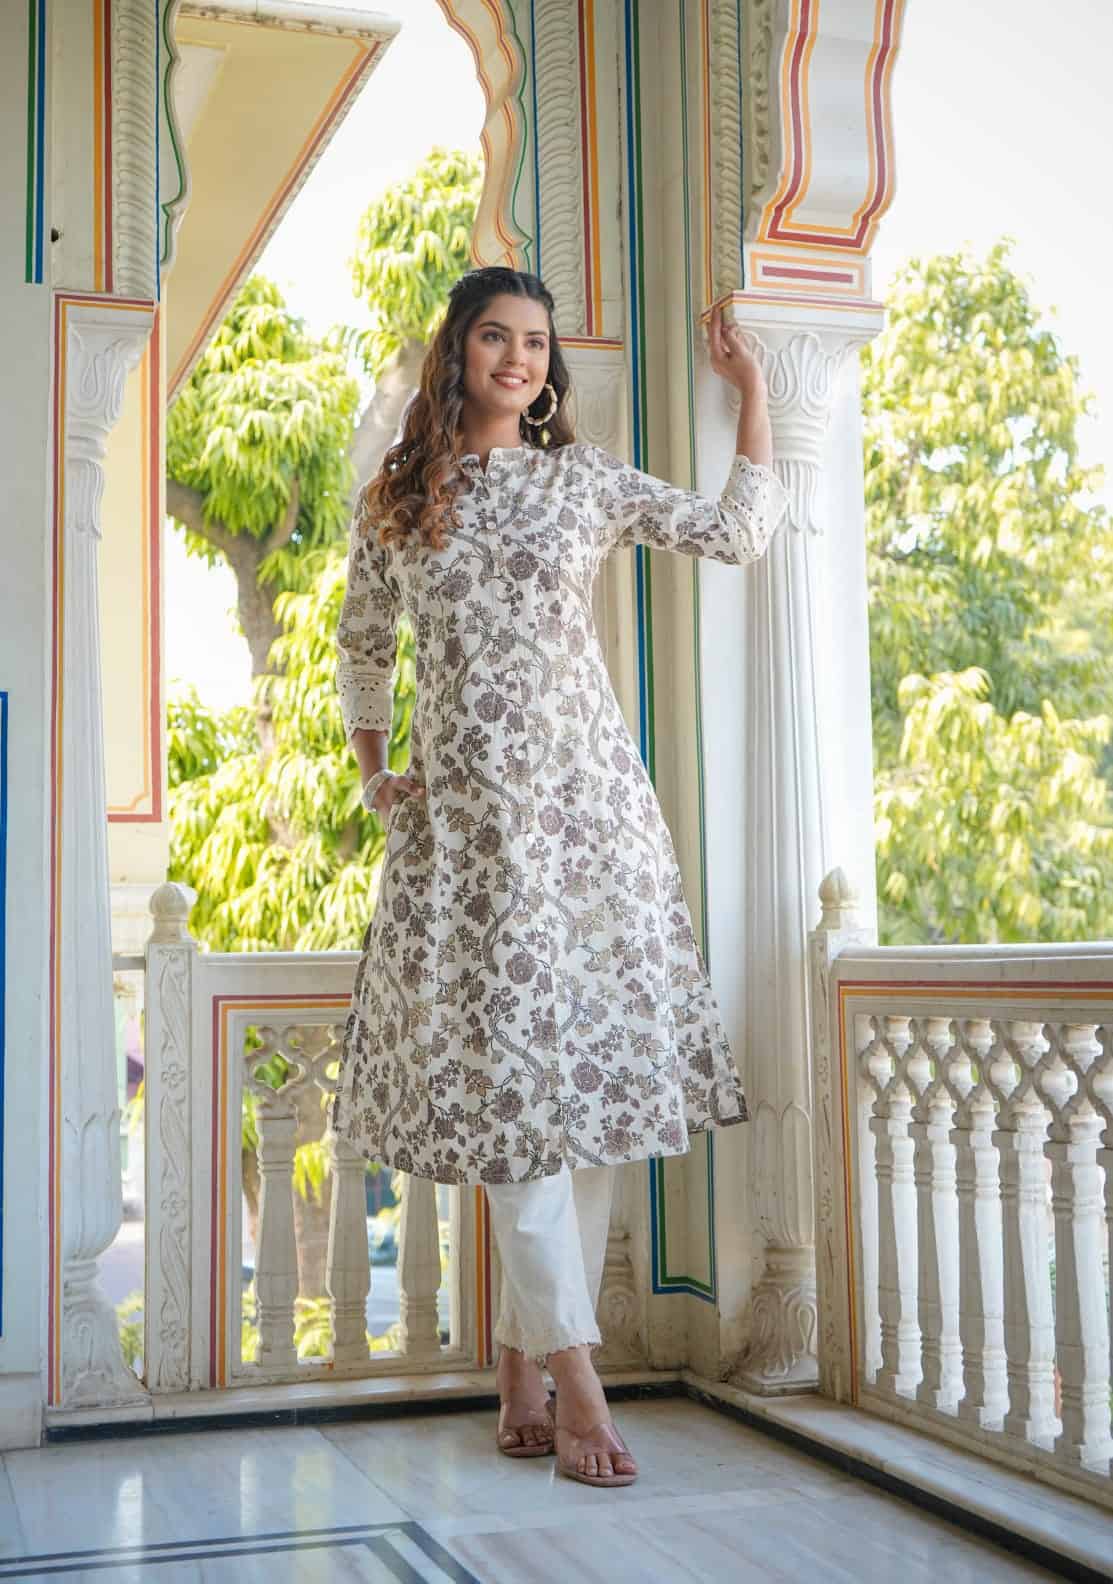 Looking for the Best Kurtis in India? Here are Some Reasons Why You Need to  Check Out the Online Stores - Indian Retailer